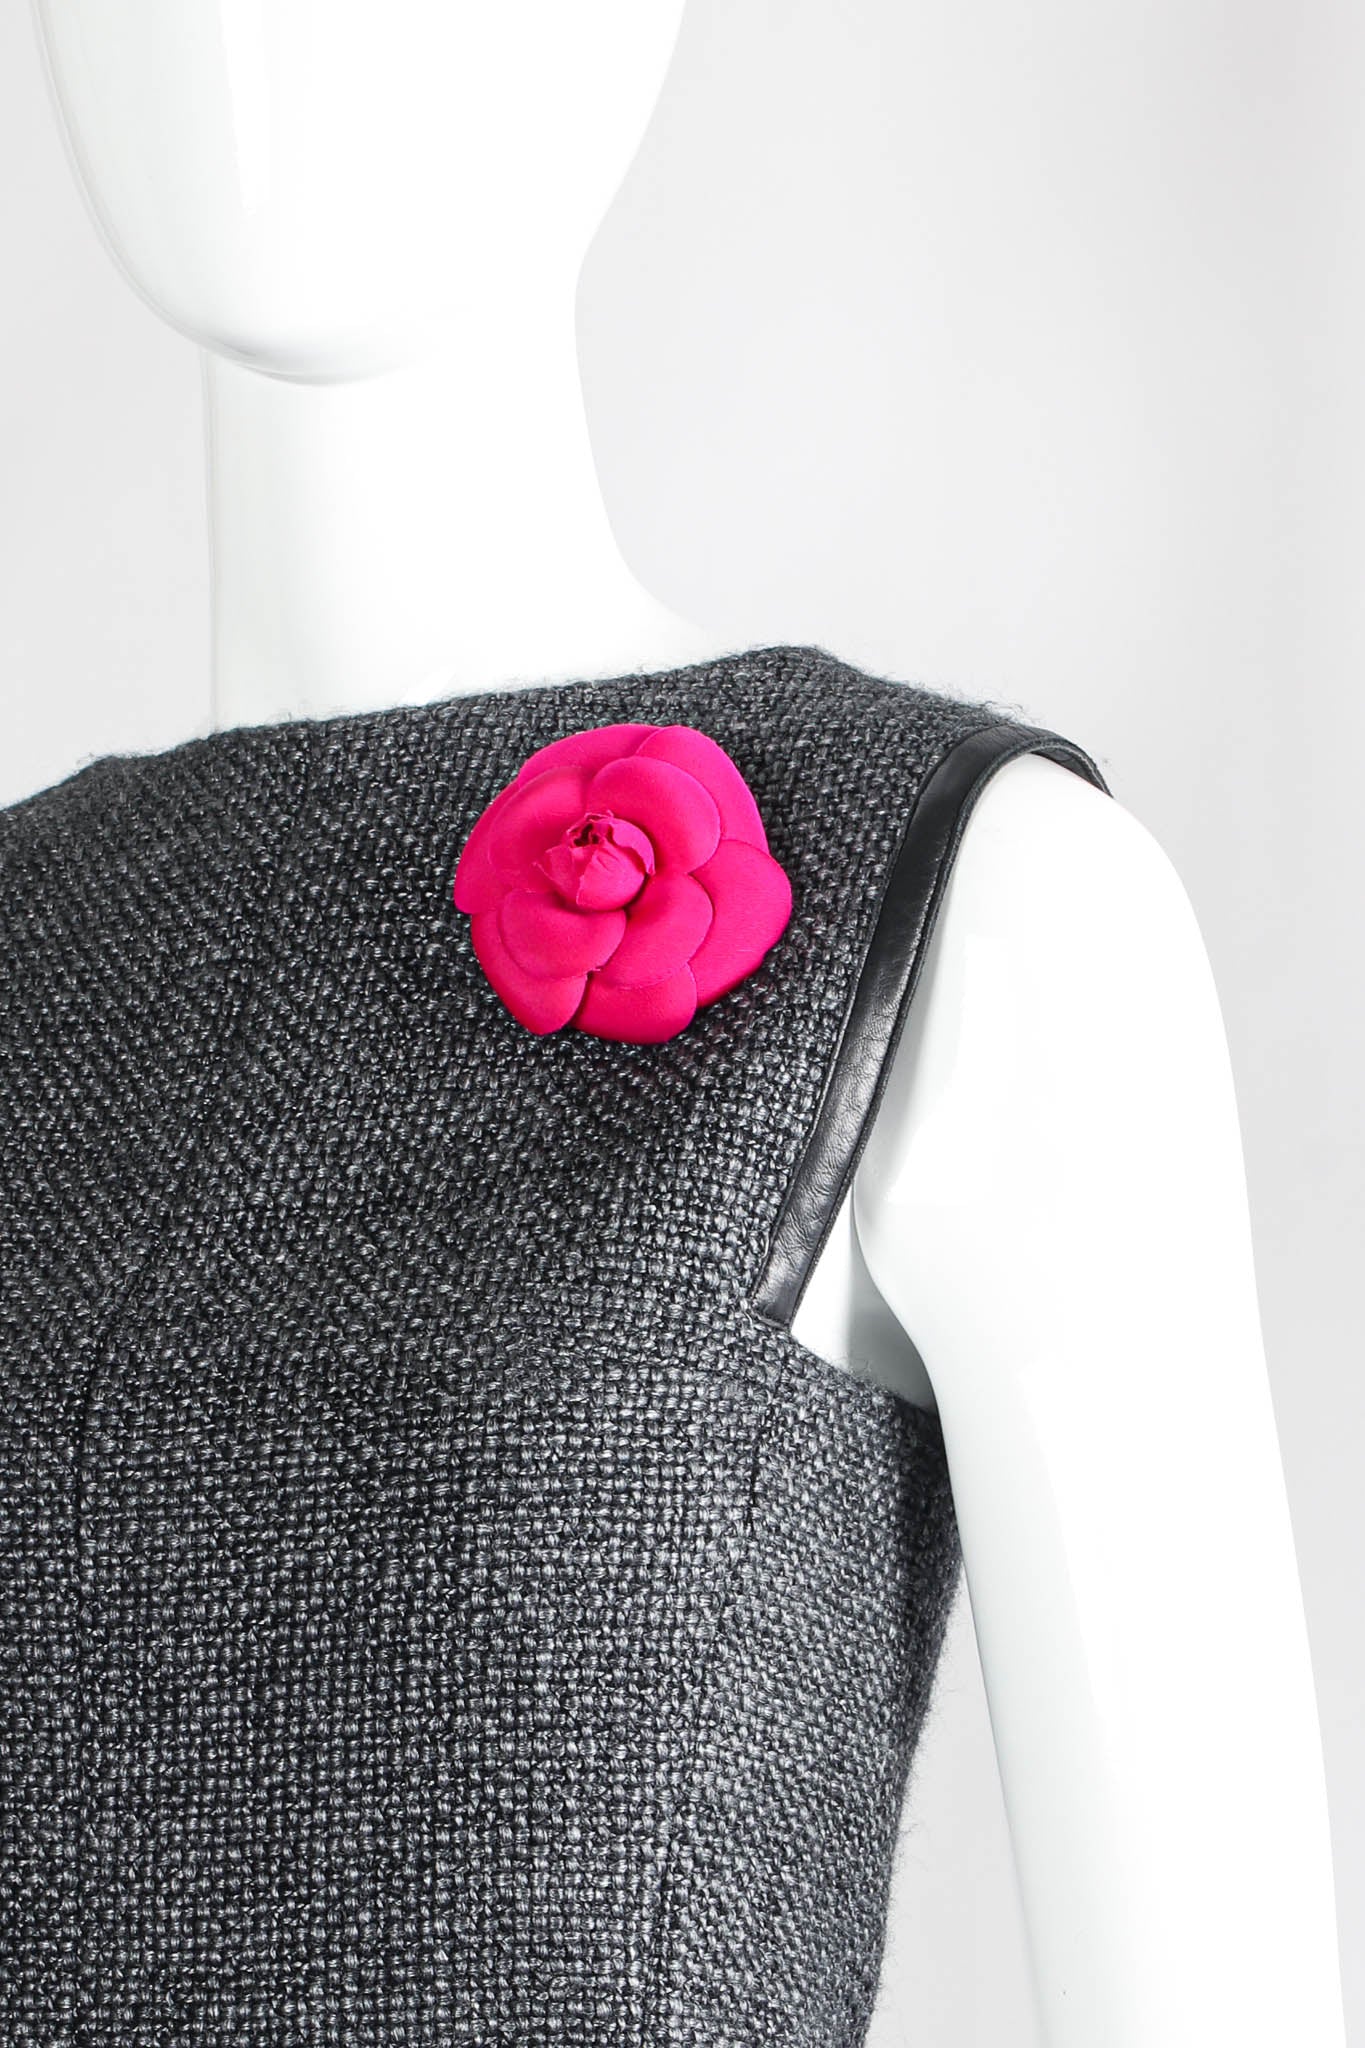 Vintage Chanel Fuchsia Camellia Flower Pin II on mannequin @ Recess Los Angeles